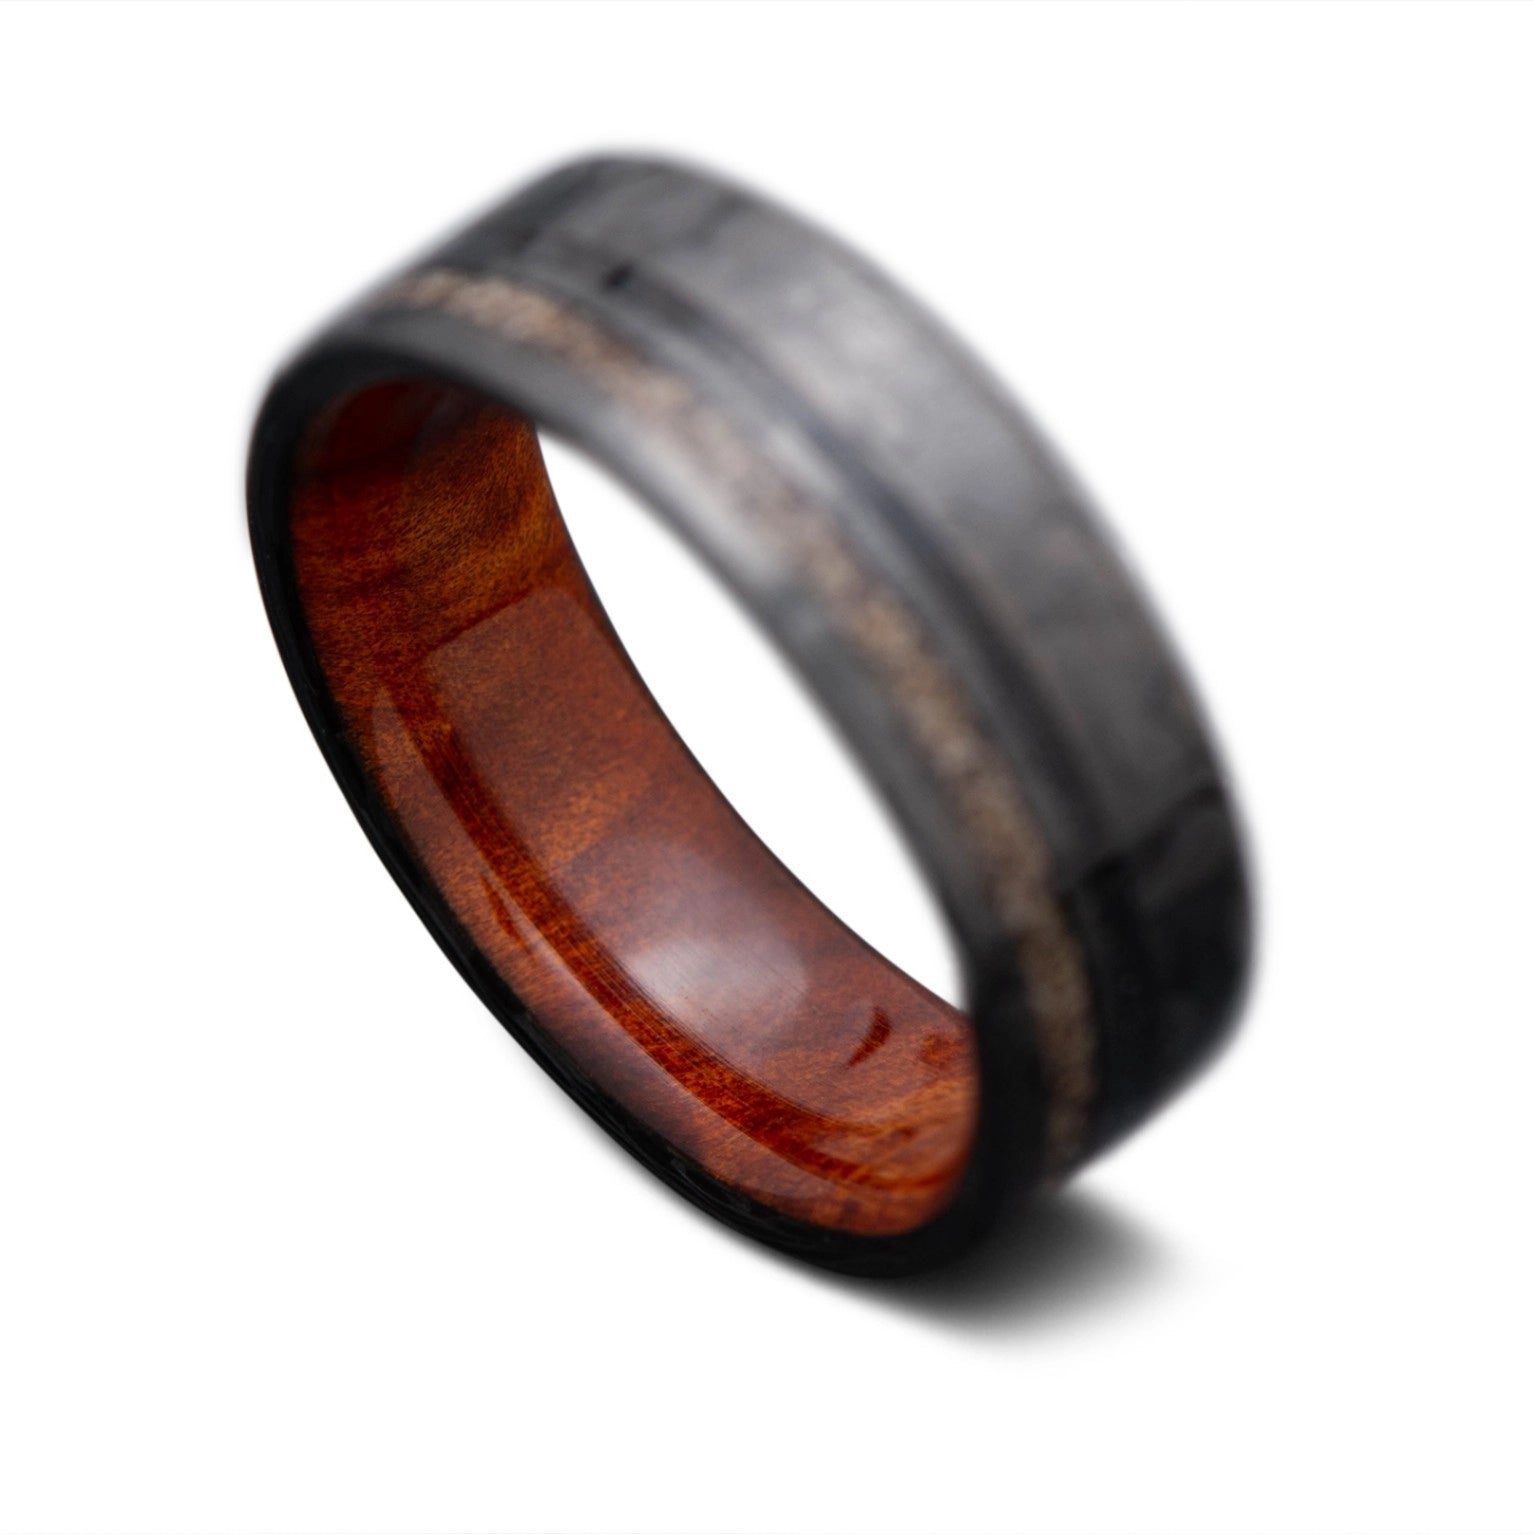 Back of CarbonTwill Core Ring with Black Onyx, Crushed T-Rex inlay and Thuya inner sleeve, 7mm -THE SEEKER